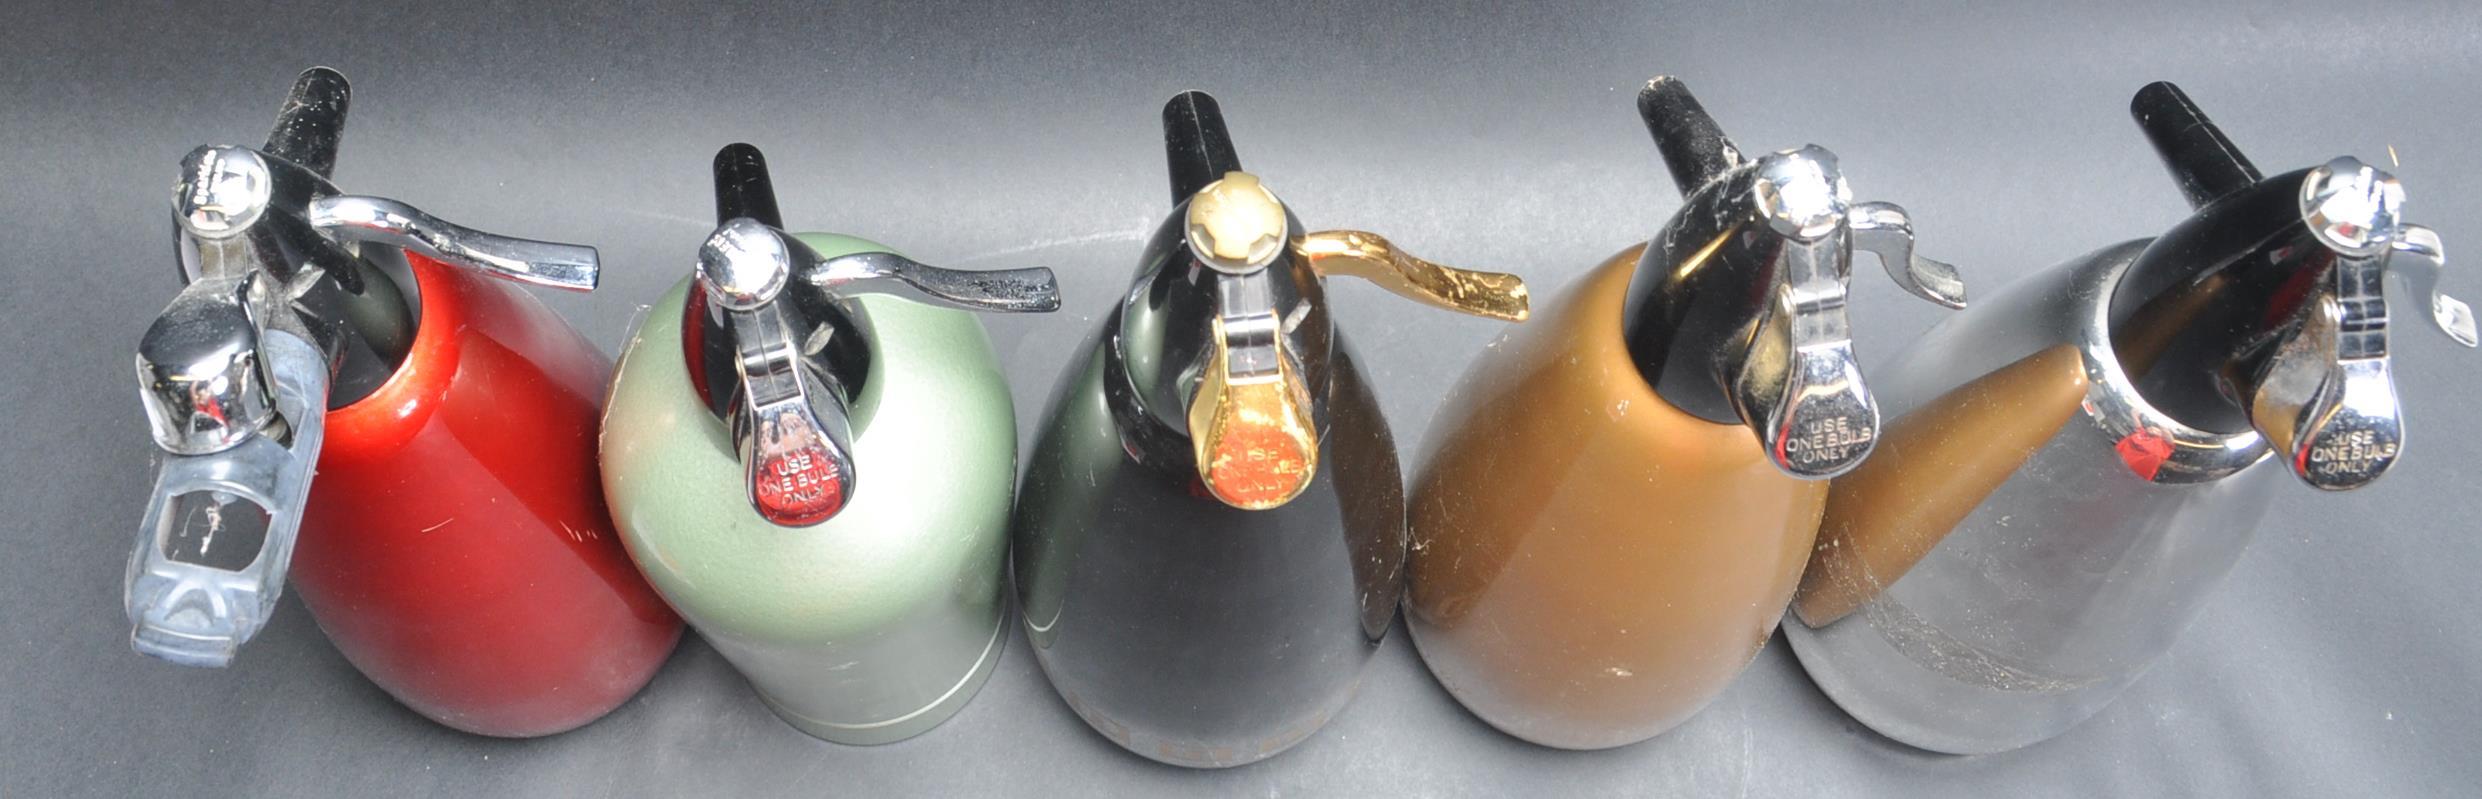 COLLECTION OF FIVE 1970’S SIPHON BOTTLES - Image 5 of 6